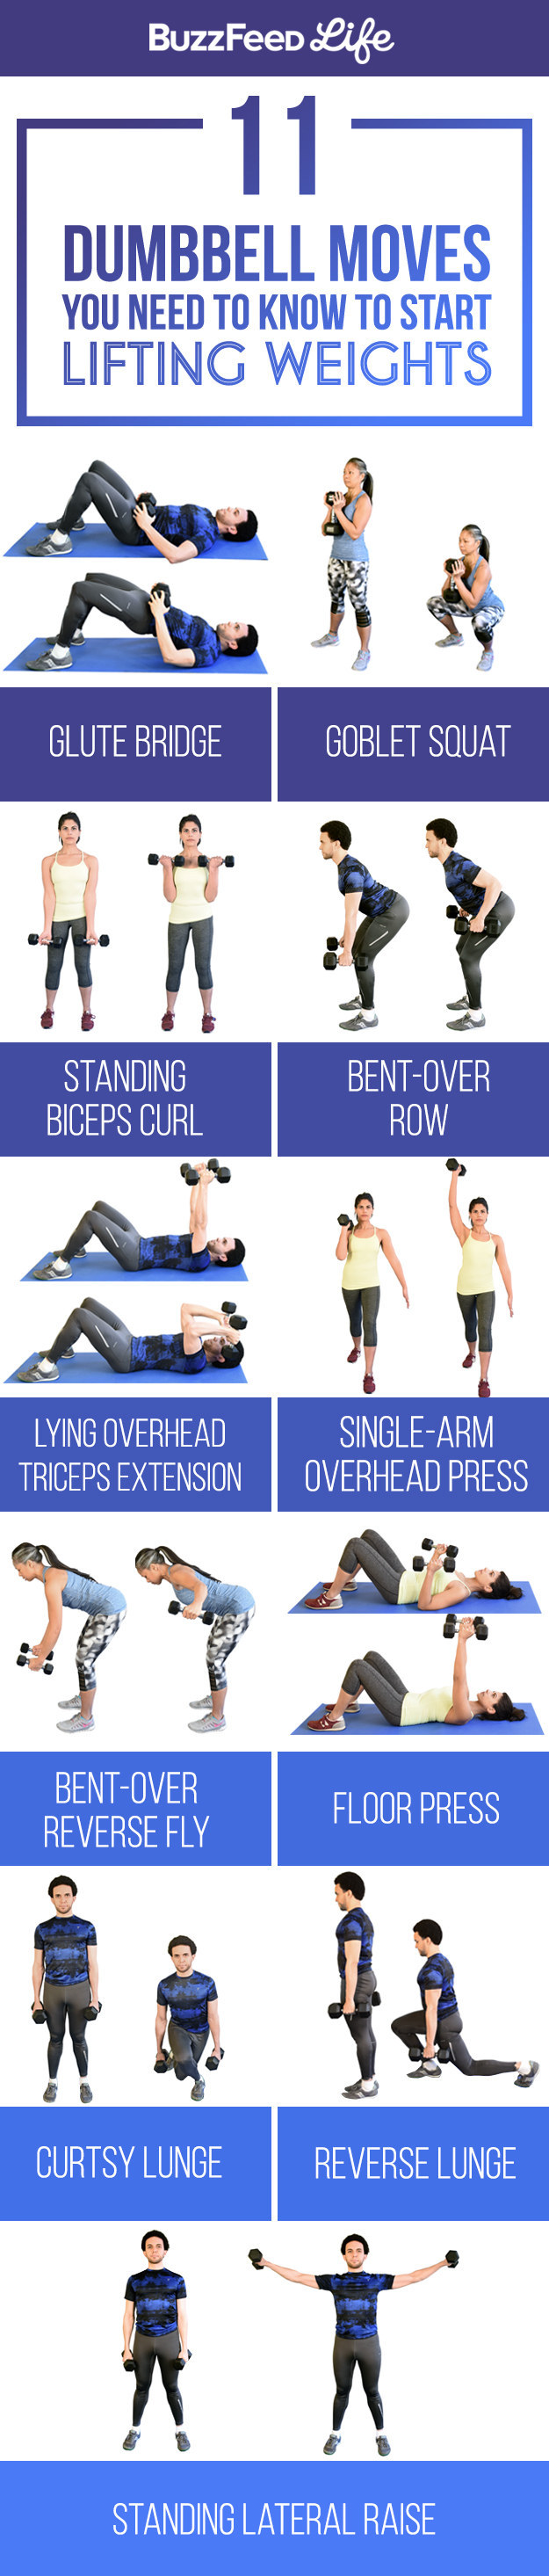 11 Dumbbell Moves You Should Know To Start Lifting Weights